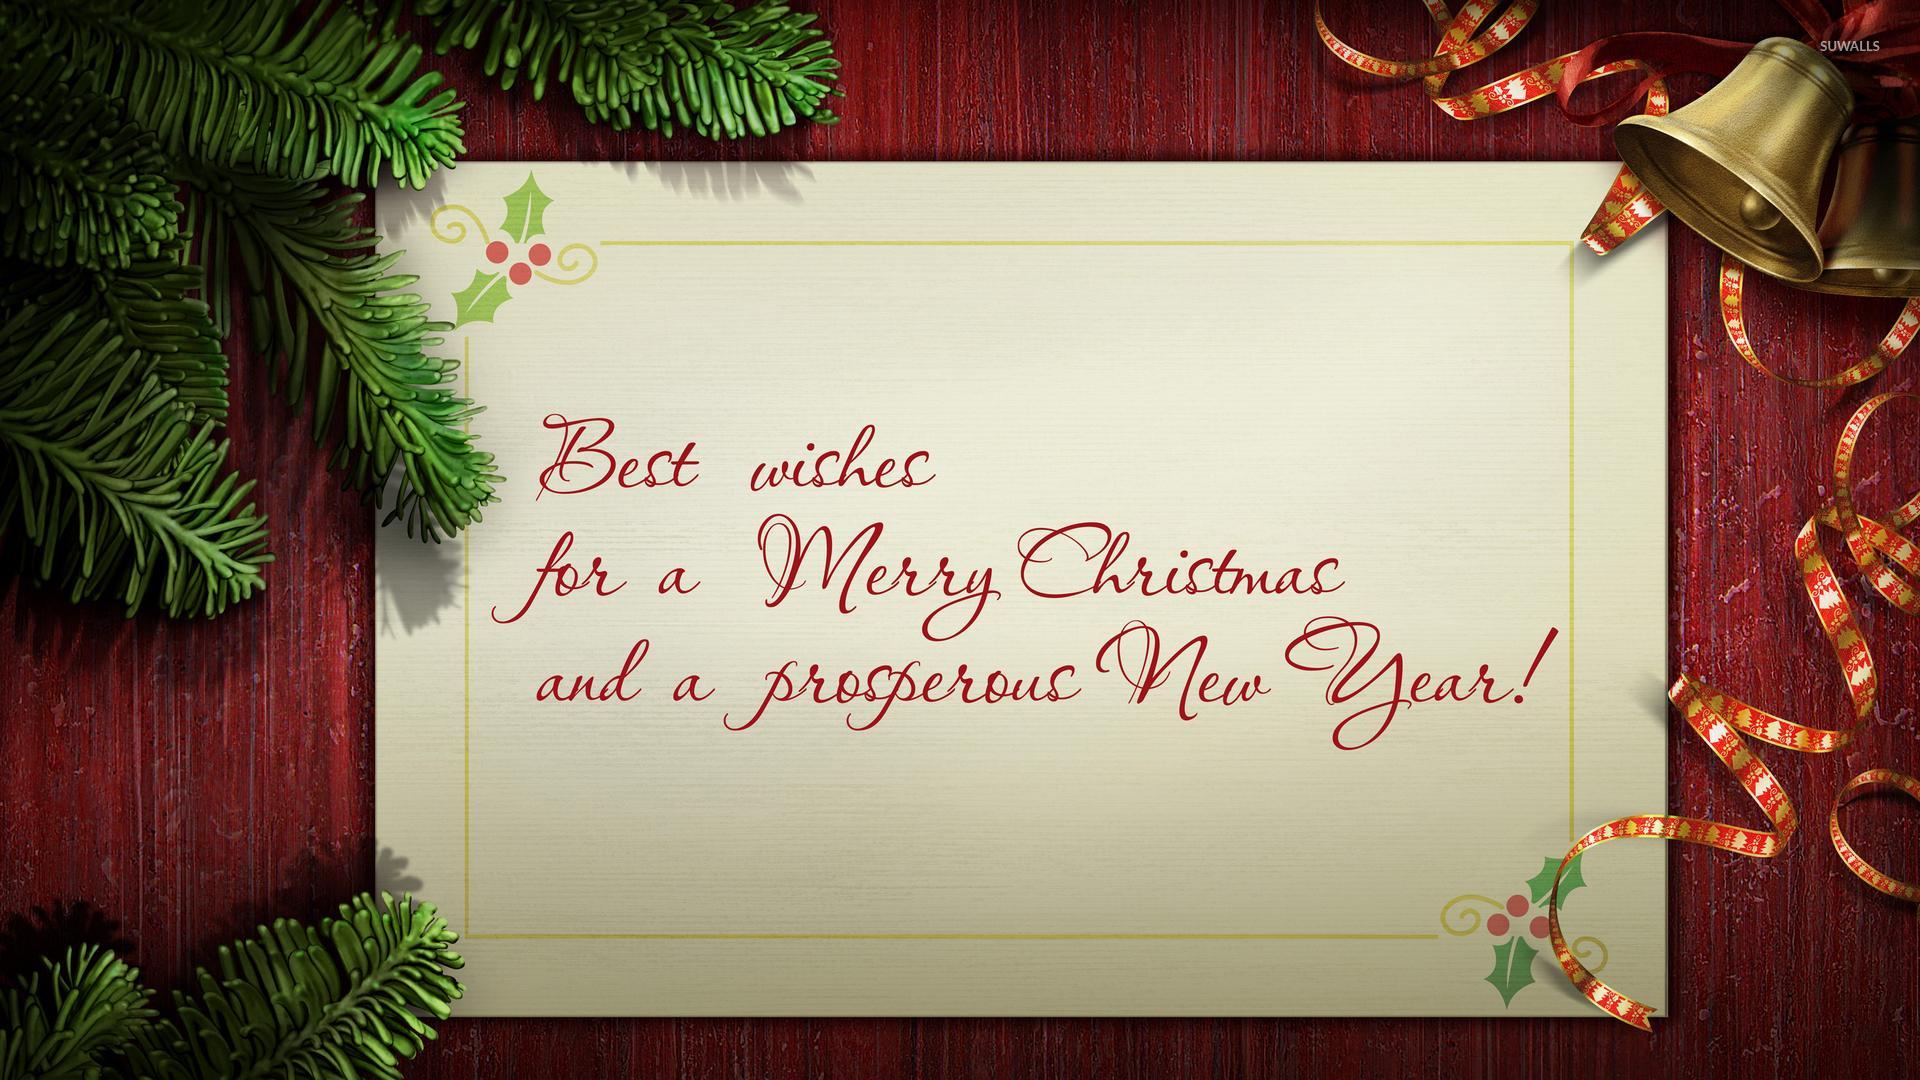 Best wishes on Christmas day and a Happy New Year wallpaper